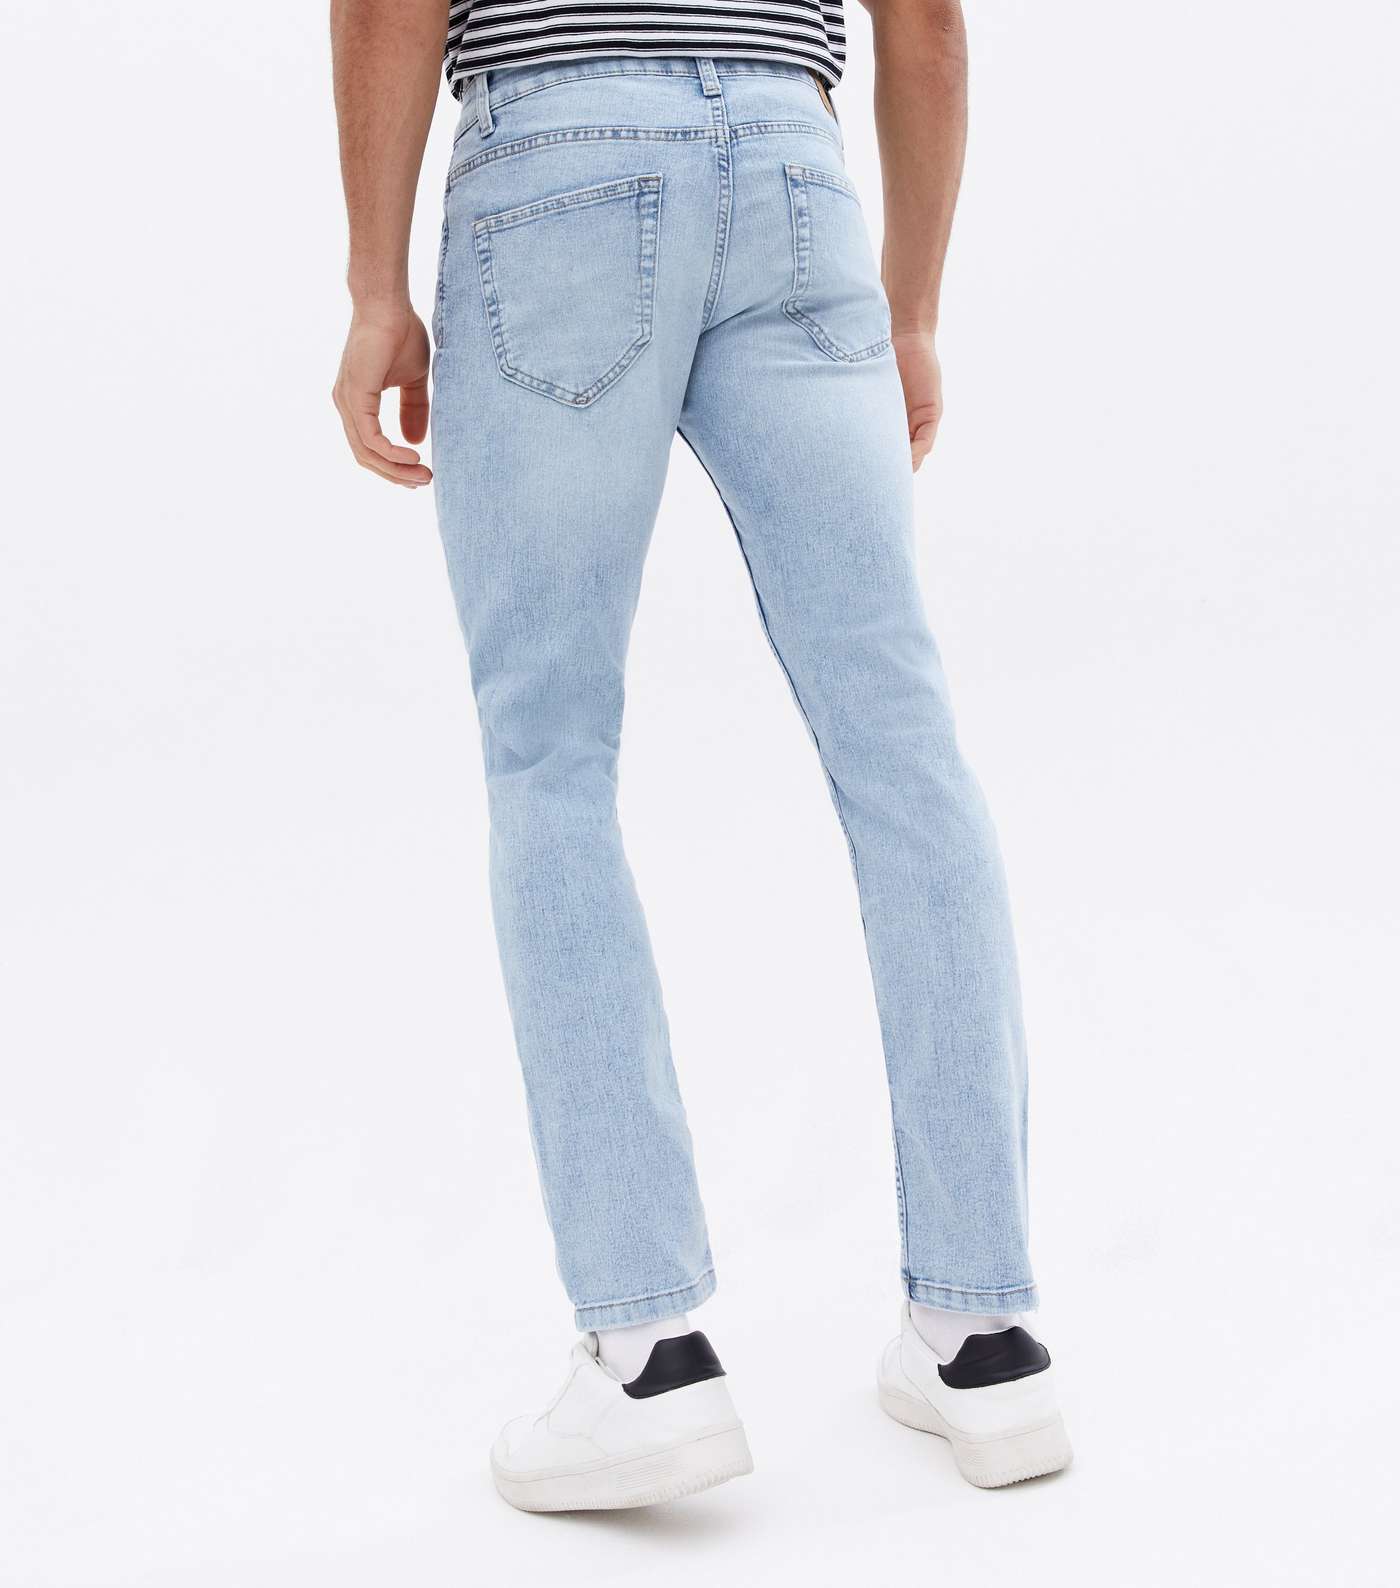 Only & Sons Pale Blue Slim Fit Jeans Image 4